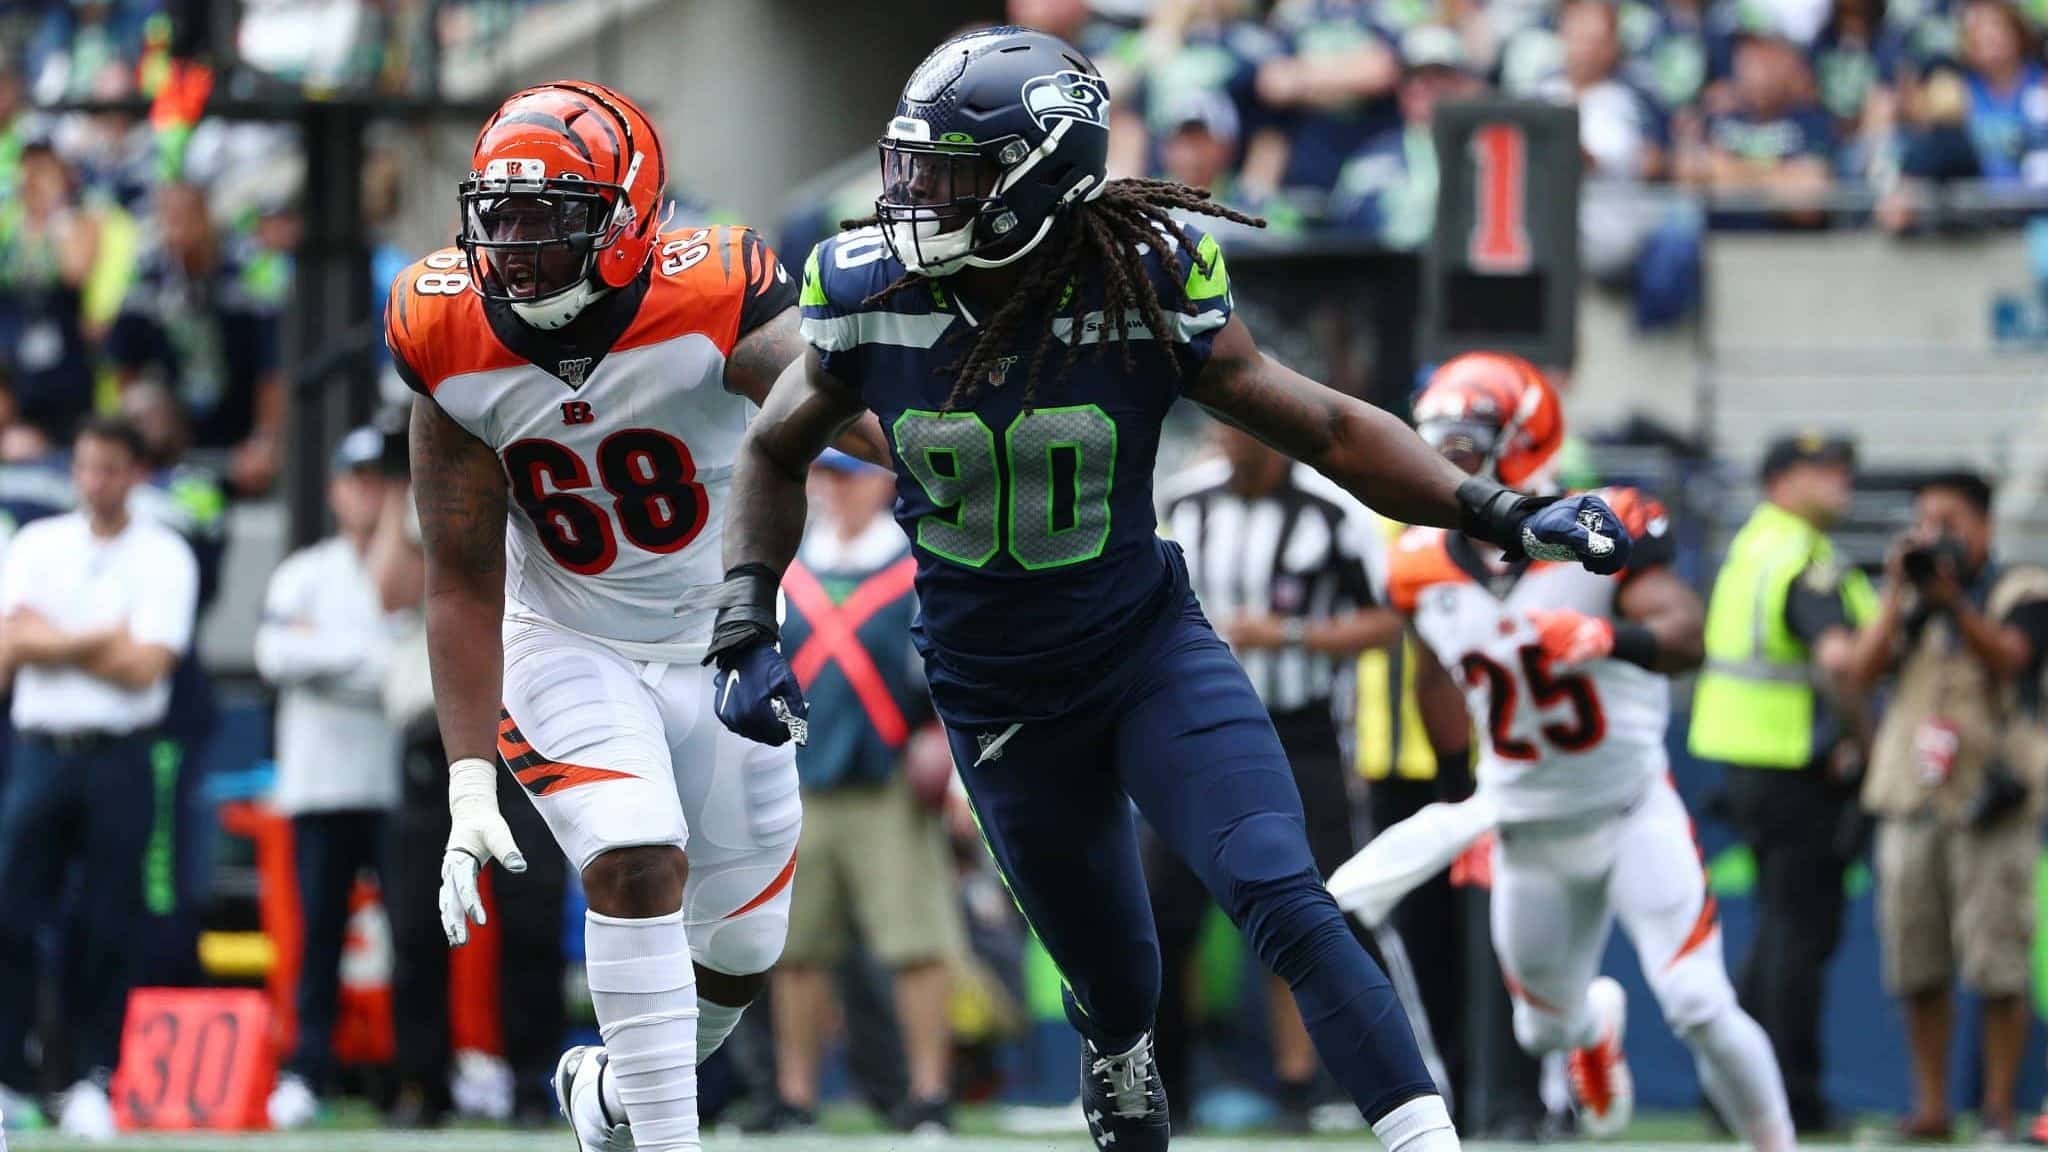 SEATTLE, WASHINGTON - SEPTEMBER 08: Jadeveon Clowney #90 of the Seattle Seahawks in action in the second quarter against the Cincinnati Bengals during their game at CenturyLink Field on September 08, 2019 in Seattle, Washington.